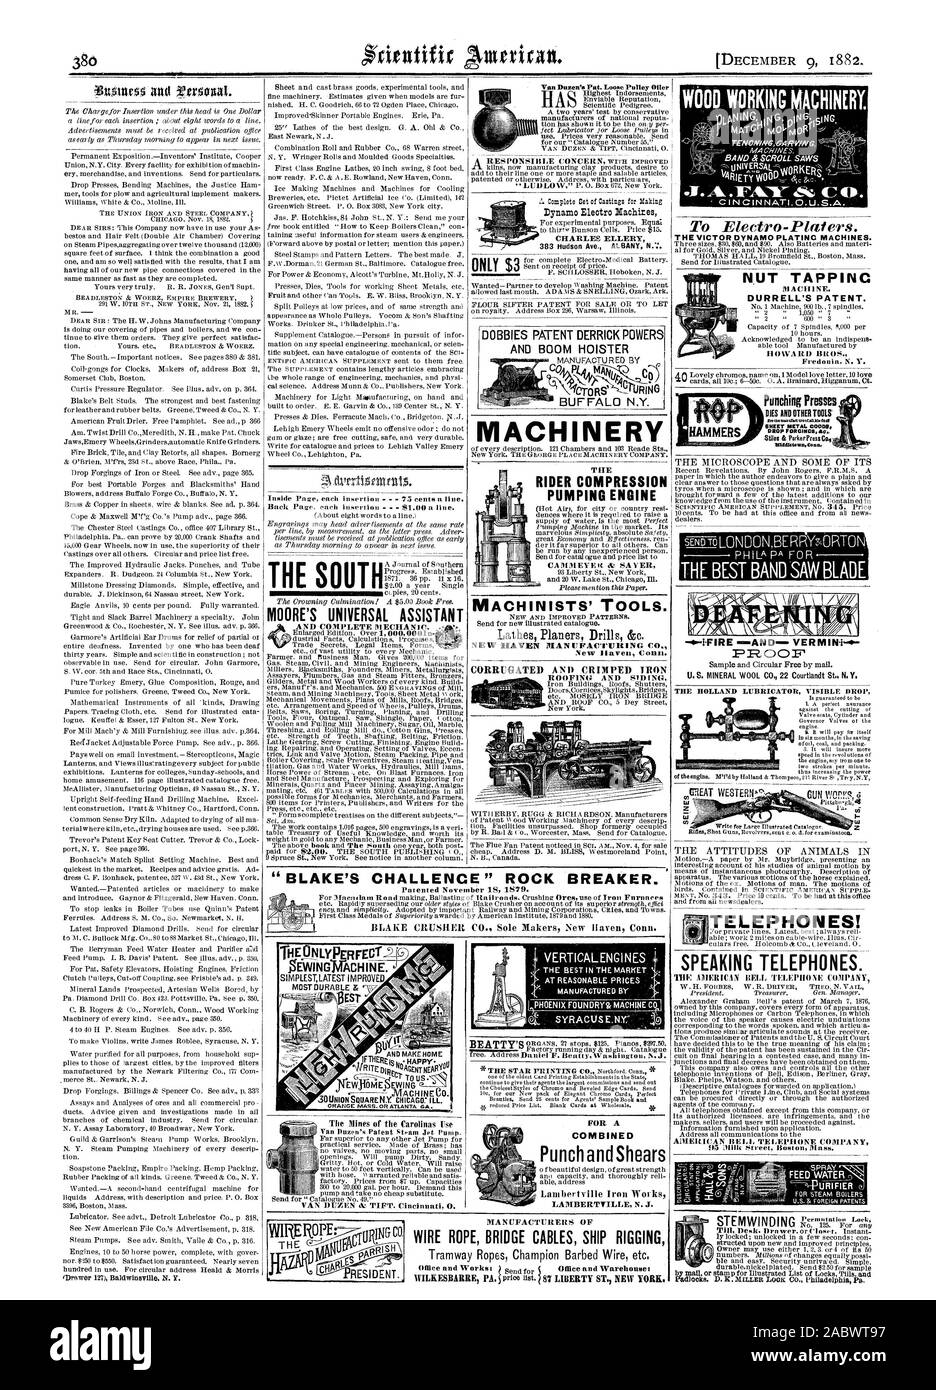 MOORE'S UNIVERSAL ASSISTANT CORRUGATED AND CRIMPED IRON To Electro-Plaiers. PROOF STEMWINDING MACHINISTS' TOOLS. RIDER COMPRESSION PUMPING ENGINE CA MMEYE it dr SAYER ONLY $3 DOBBIES PATENT DERRICK POWERS AND BOOM HOISTER BUFFALO N.Y. ACHINERY TELEPHONES! SPEAKING TELEPHONES. Van Duzen's Pat. Loose Pulley Oiler Dynamo Eleotro Machines 'BLAKE'S CHALLENCE ' ROCK BREAKER. NLYPERFECT OEWINGVACH I N E. EST FOR A COMBINED Punch and Shears LAMBERTVILLE N. J. SYRACUSE.Nr: MANUFACTURERS OF WIRE ROPE BRIDGE CABLES SHIP RIGGING Tramway Ropes Champion Barbed Wire etc WOOD WORKING MACHINERY. TENOVNGGARNG Stock Photo